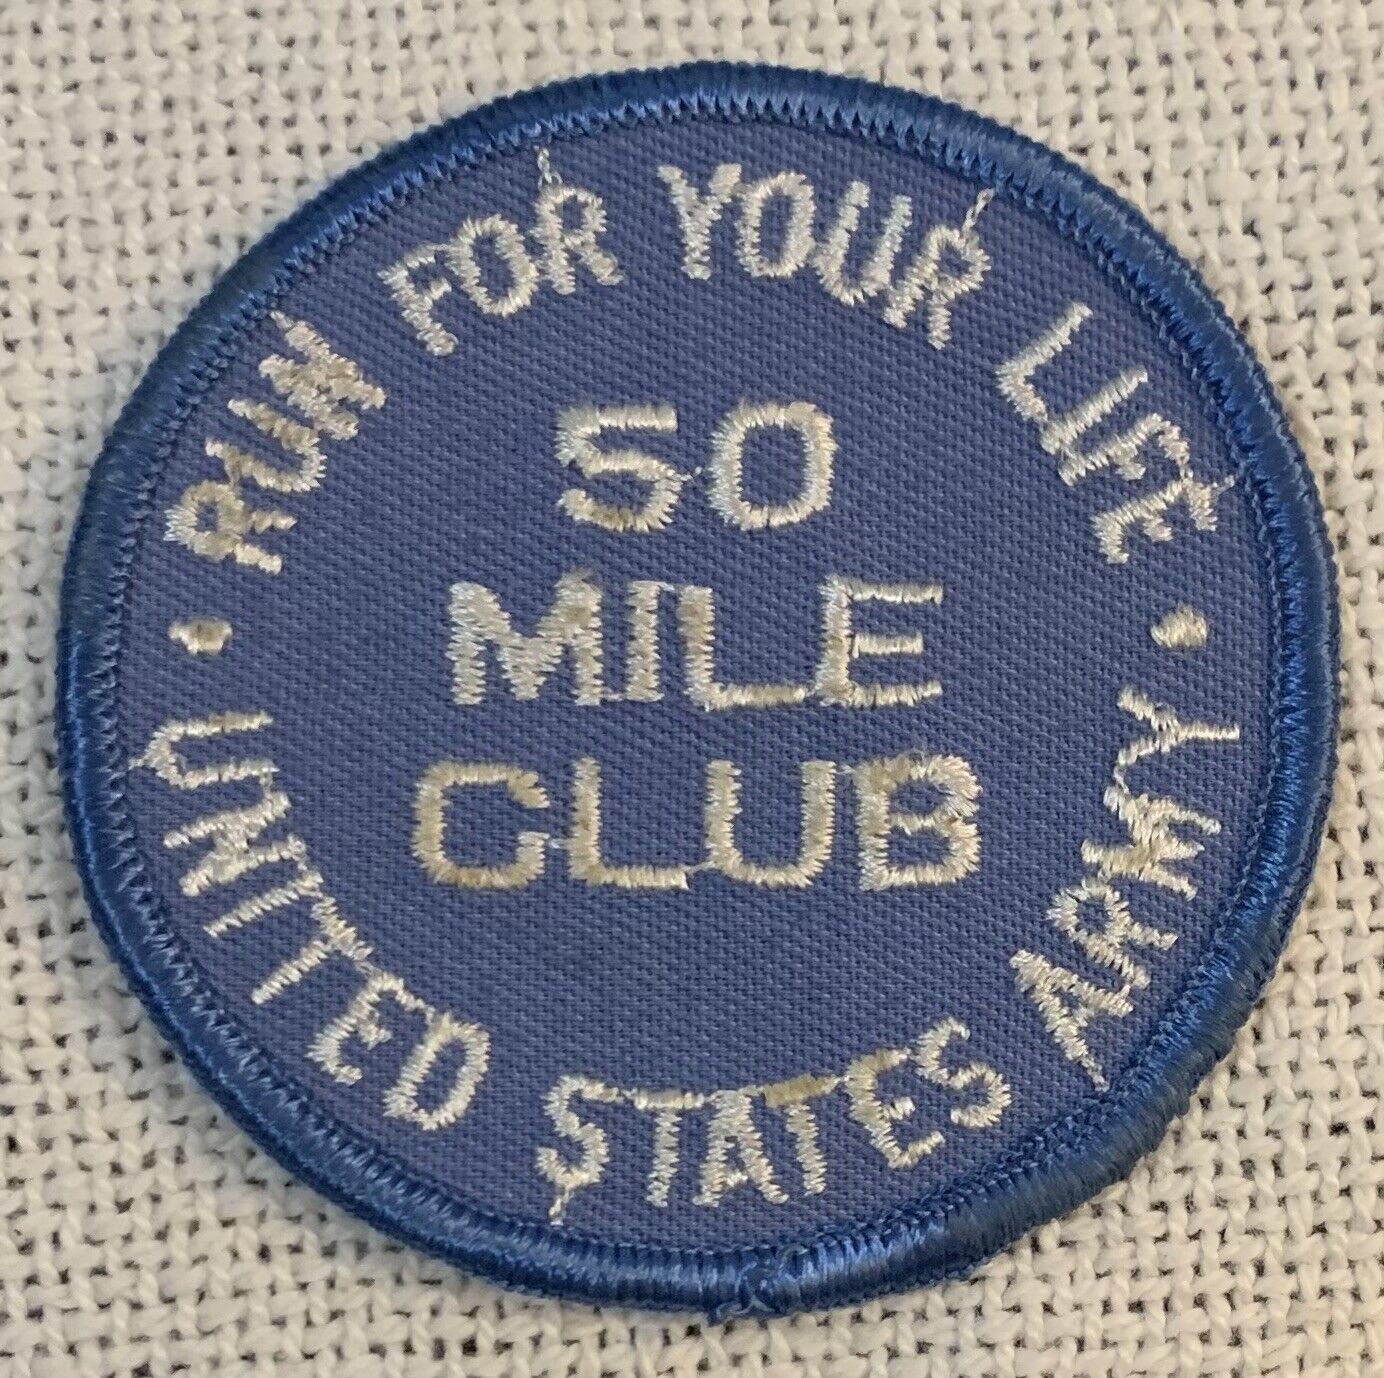 50 Mile Club Run for your Life United States Army Award Patch